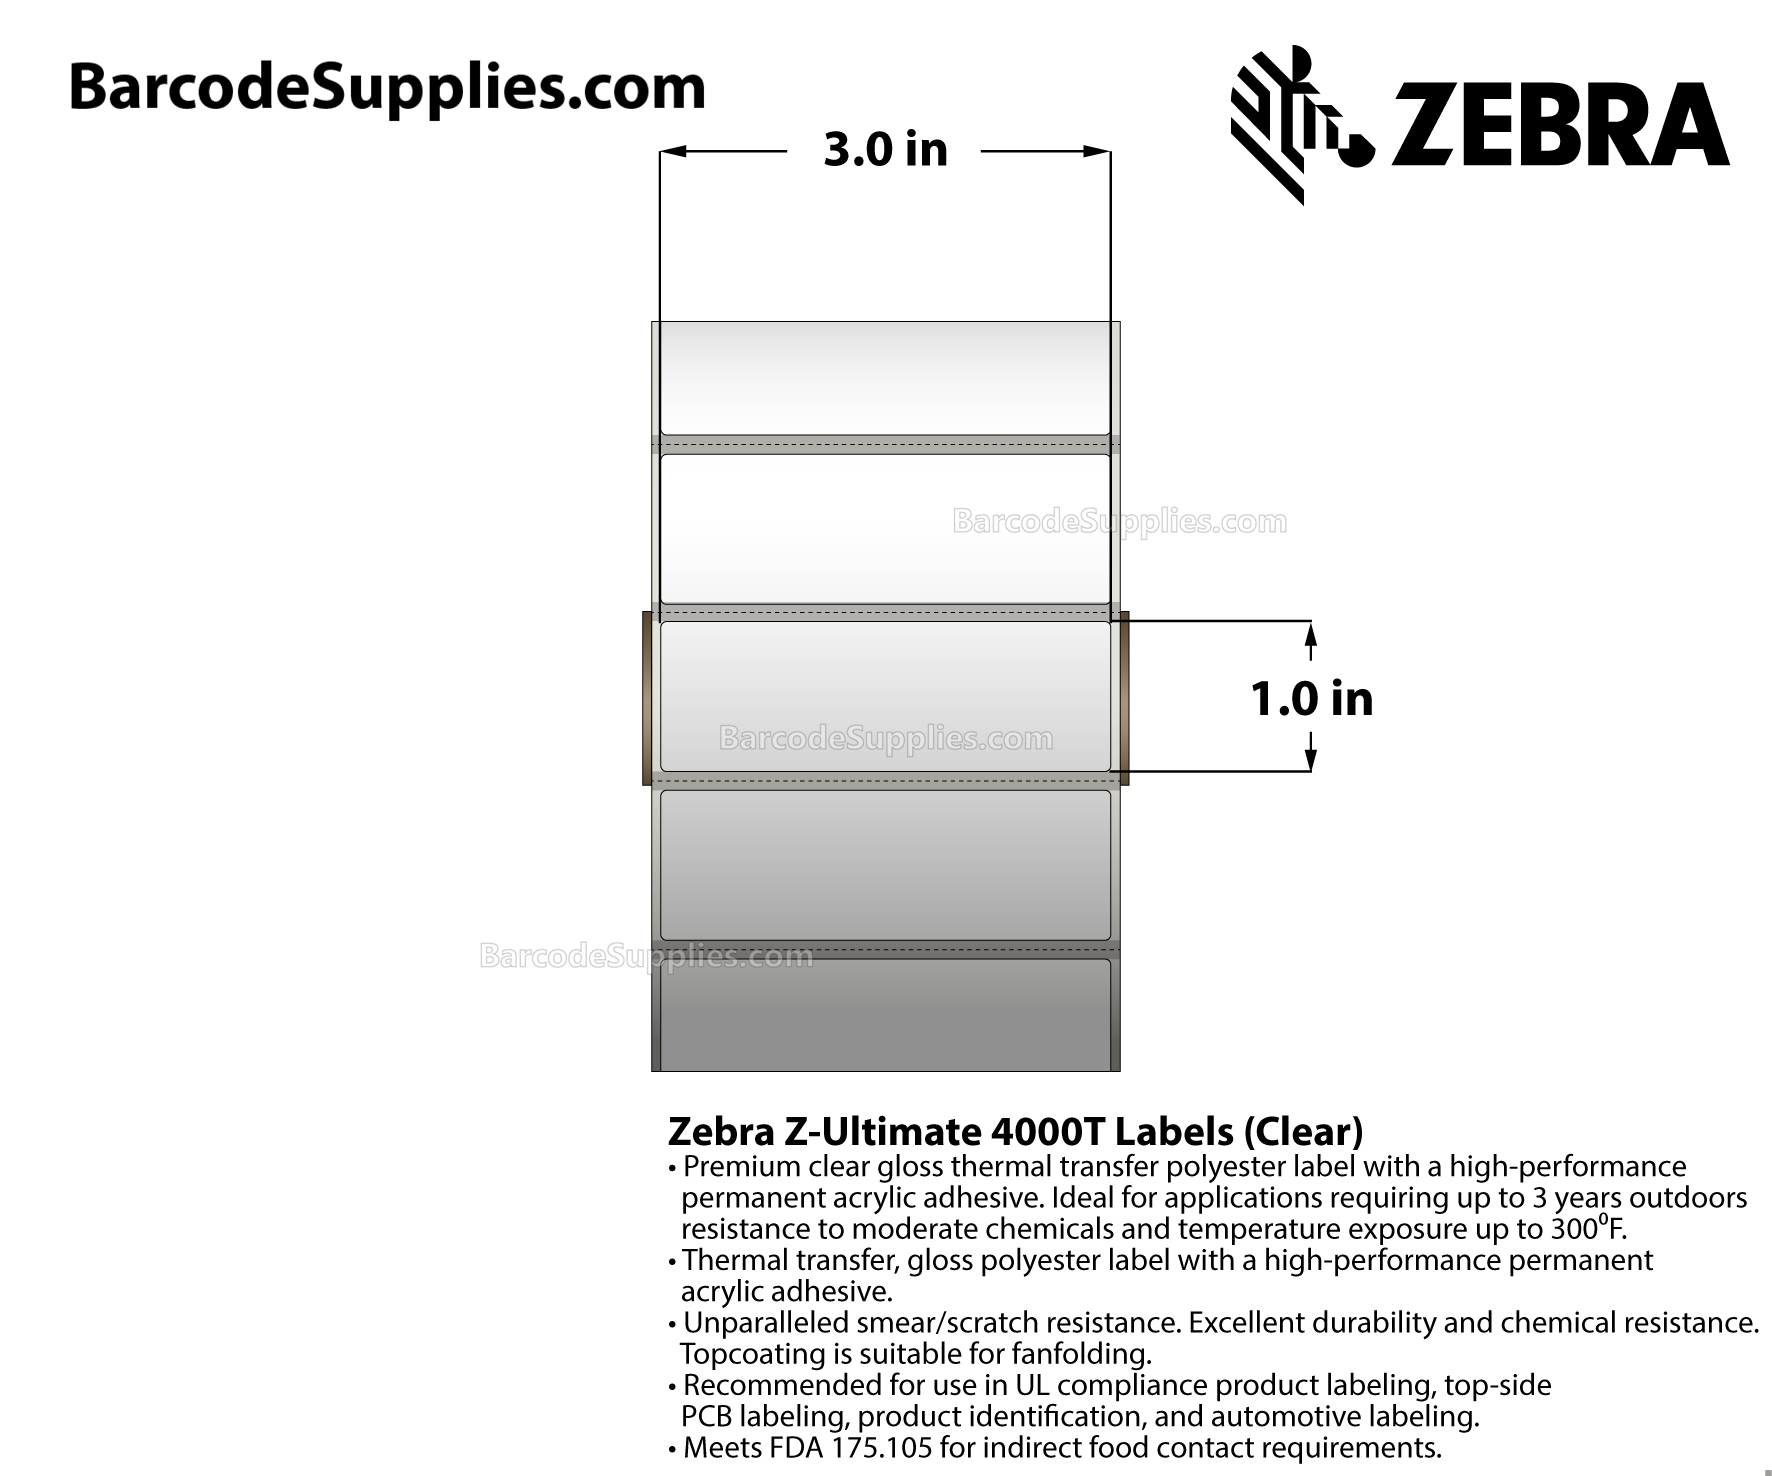 3 x 1 Thermal Transfer Clear Z-Ultimate 4000T Clear Labels With Permanent Adhesive - Black mark sensing - Black Mark - 1500 Labels Per Roll - Carton Of 1 Rolls - 1500 Labels Total - MPN: 10023046